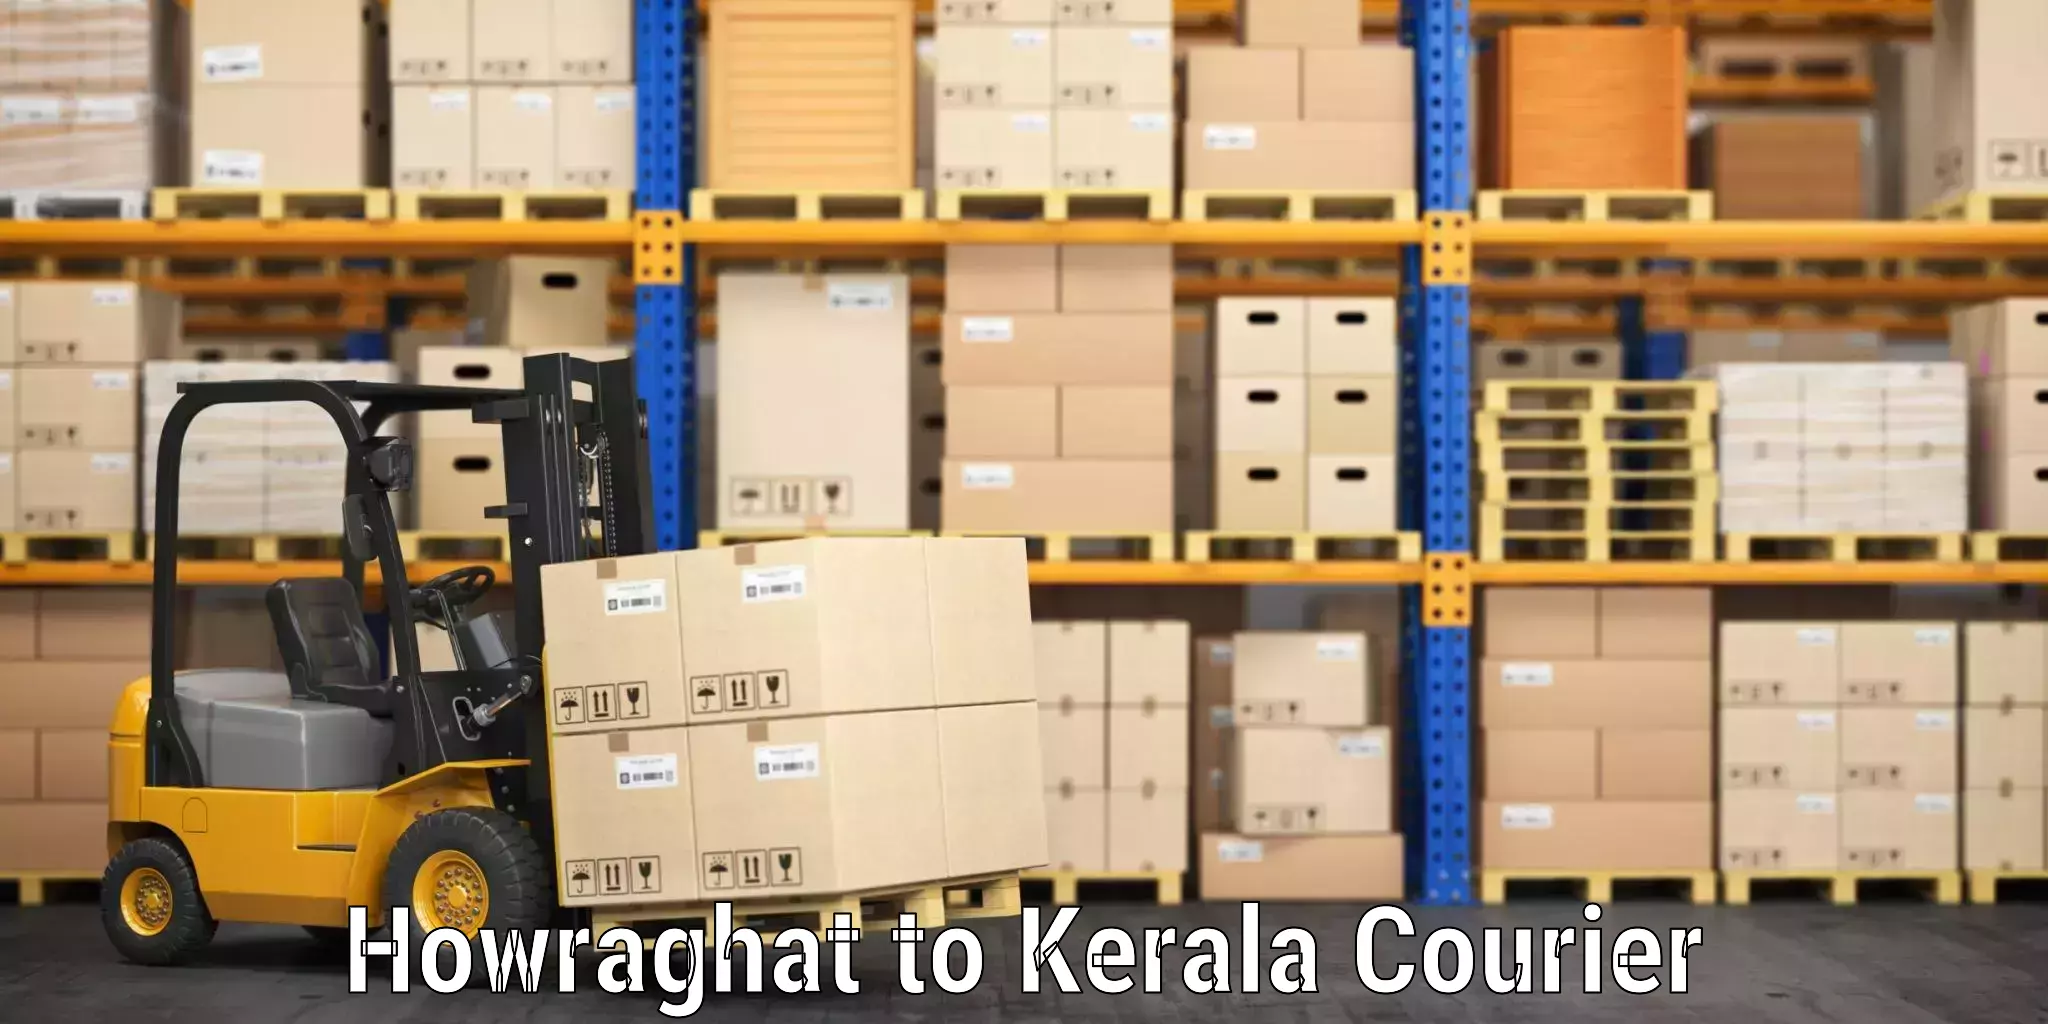 Trackable baggage shipping Howraghat to Kerala